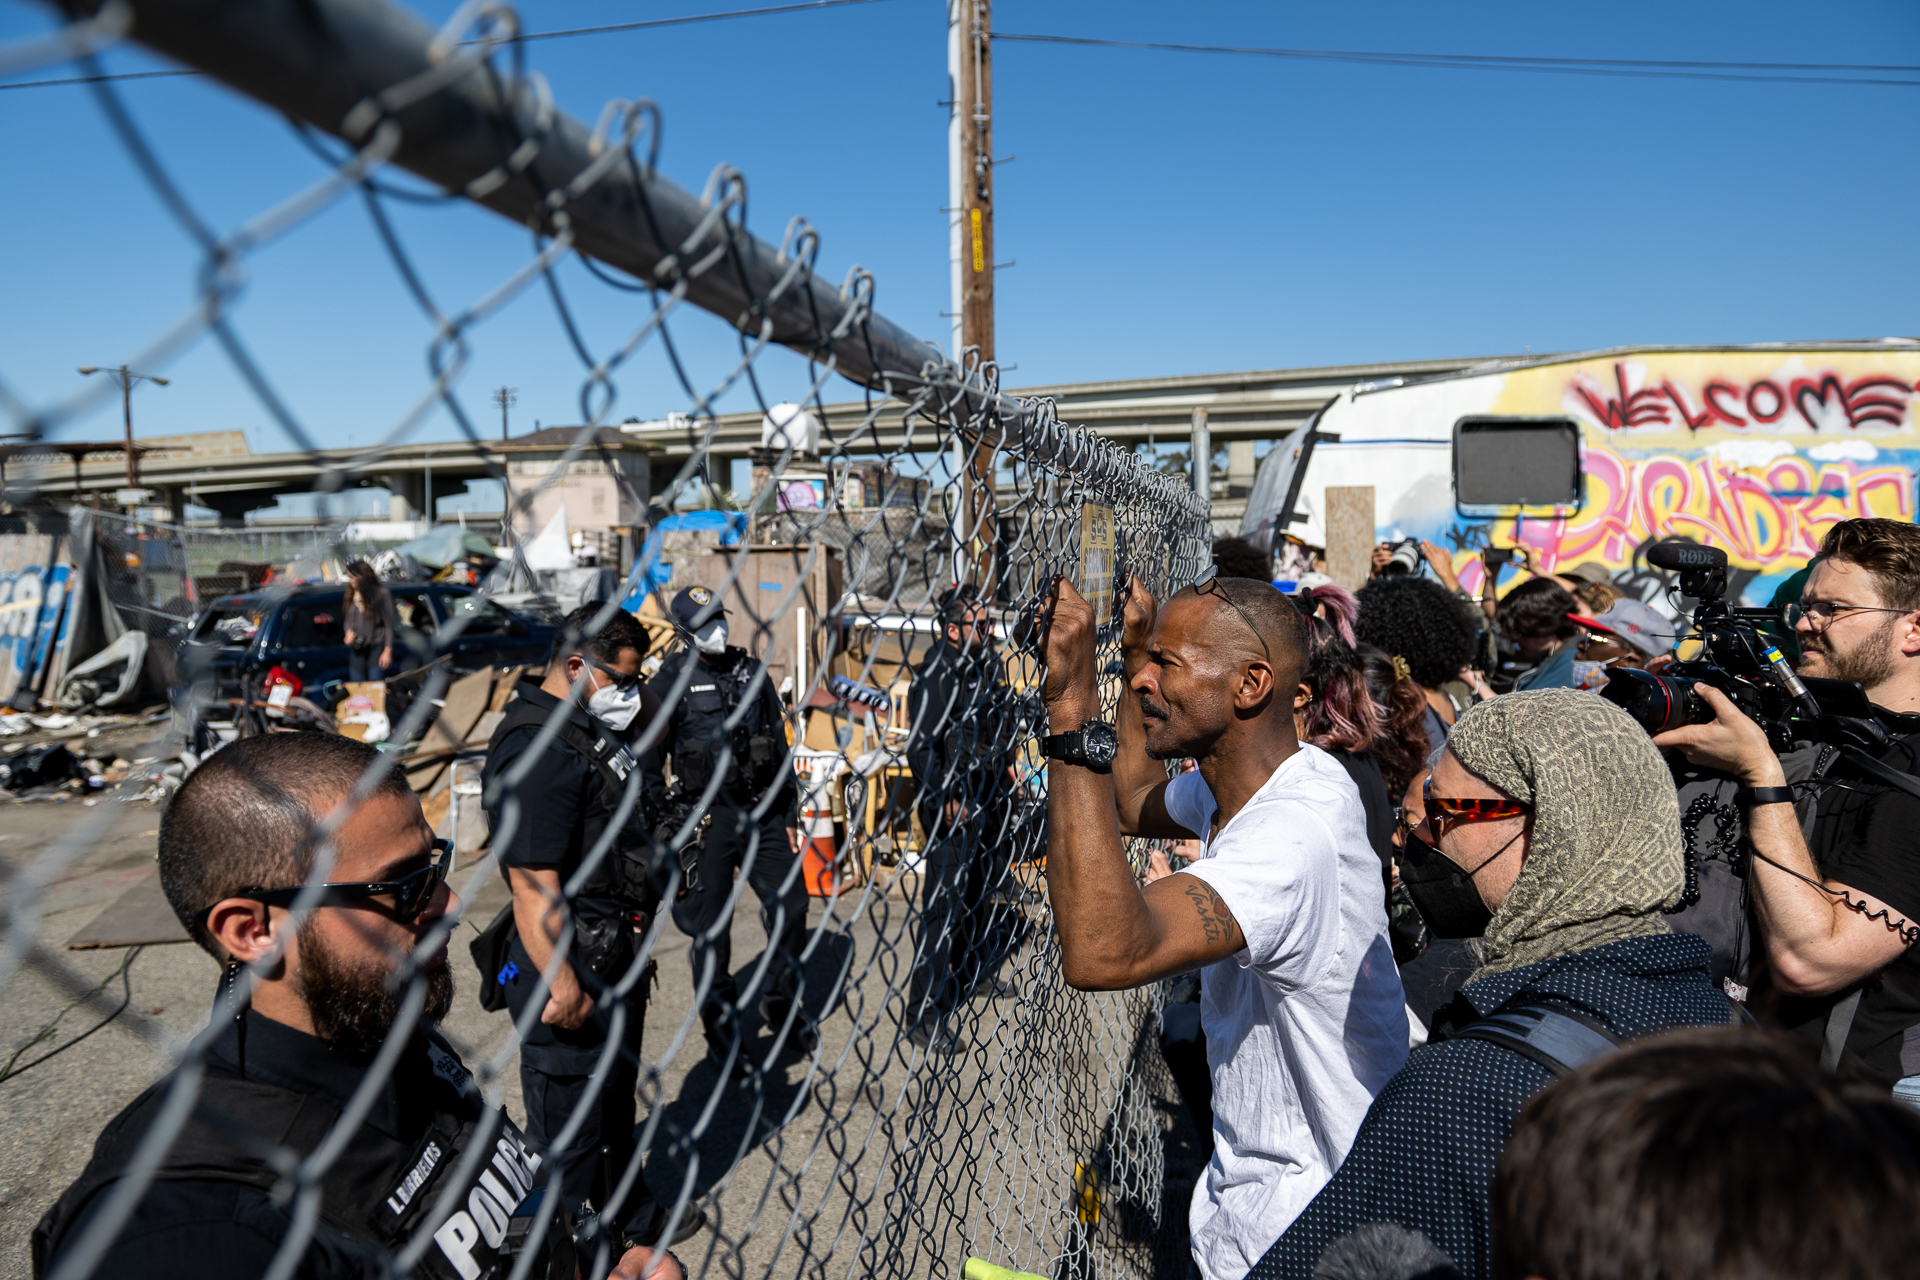 A man looks through a chain link fence at police officers on the other side of it. The man has a crowd of people behind him as his fingers rest in between the fence coils.